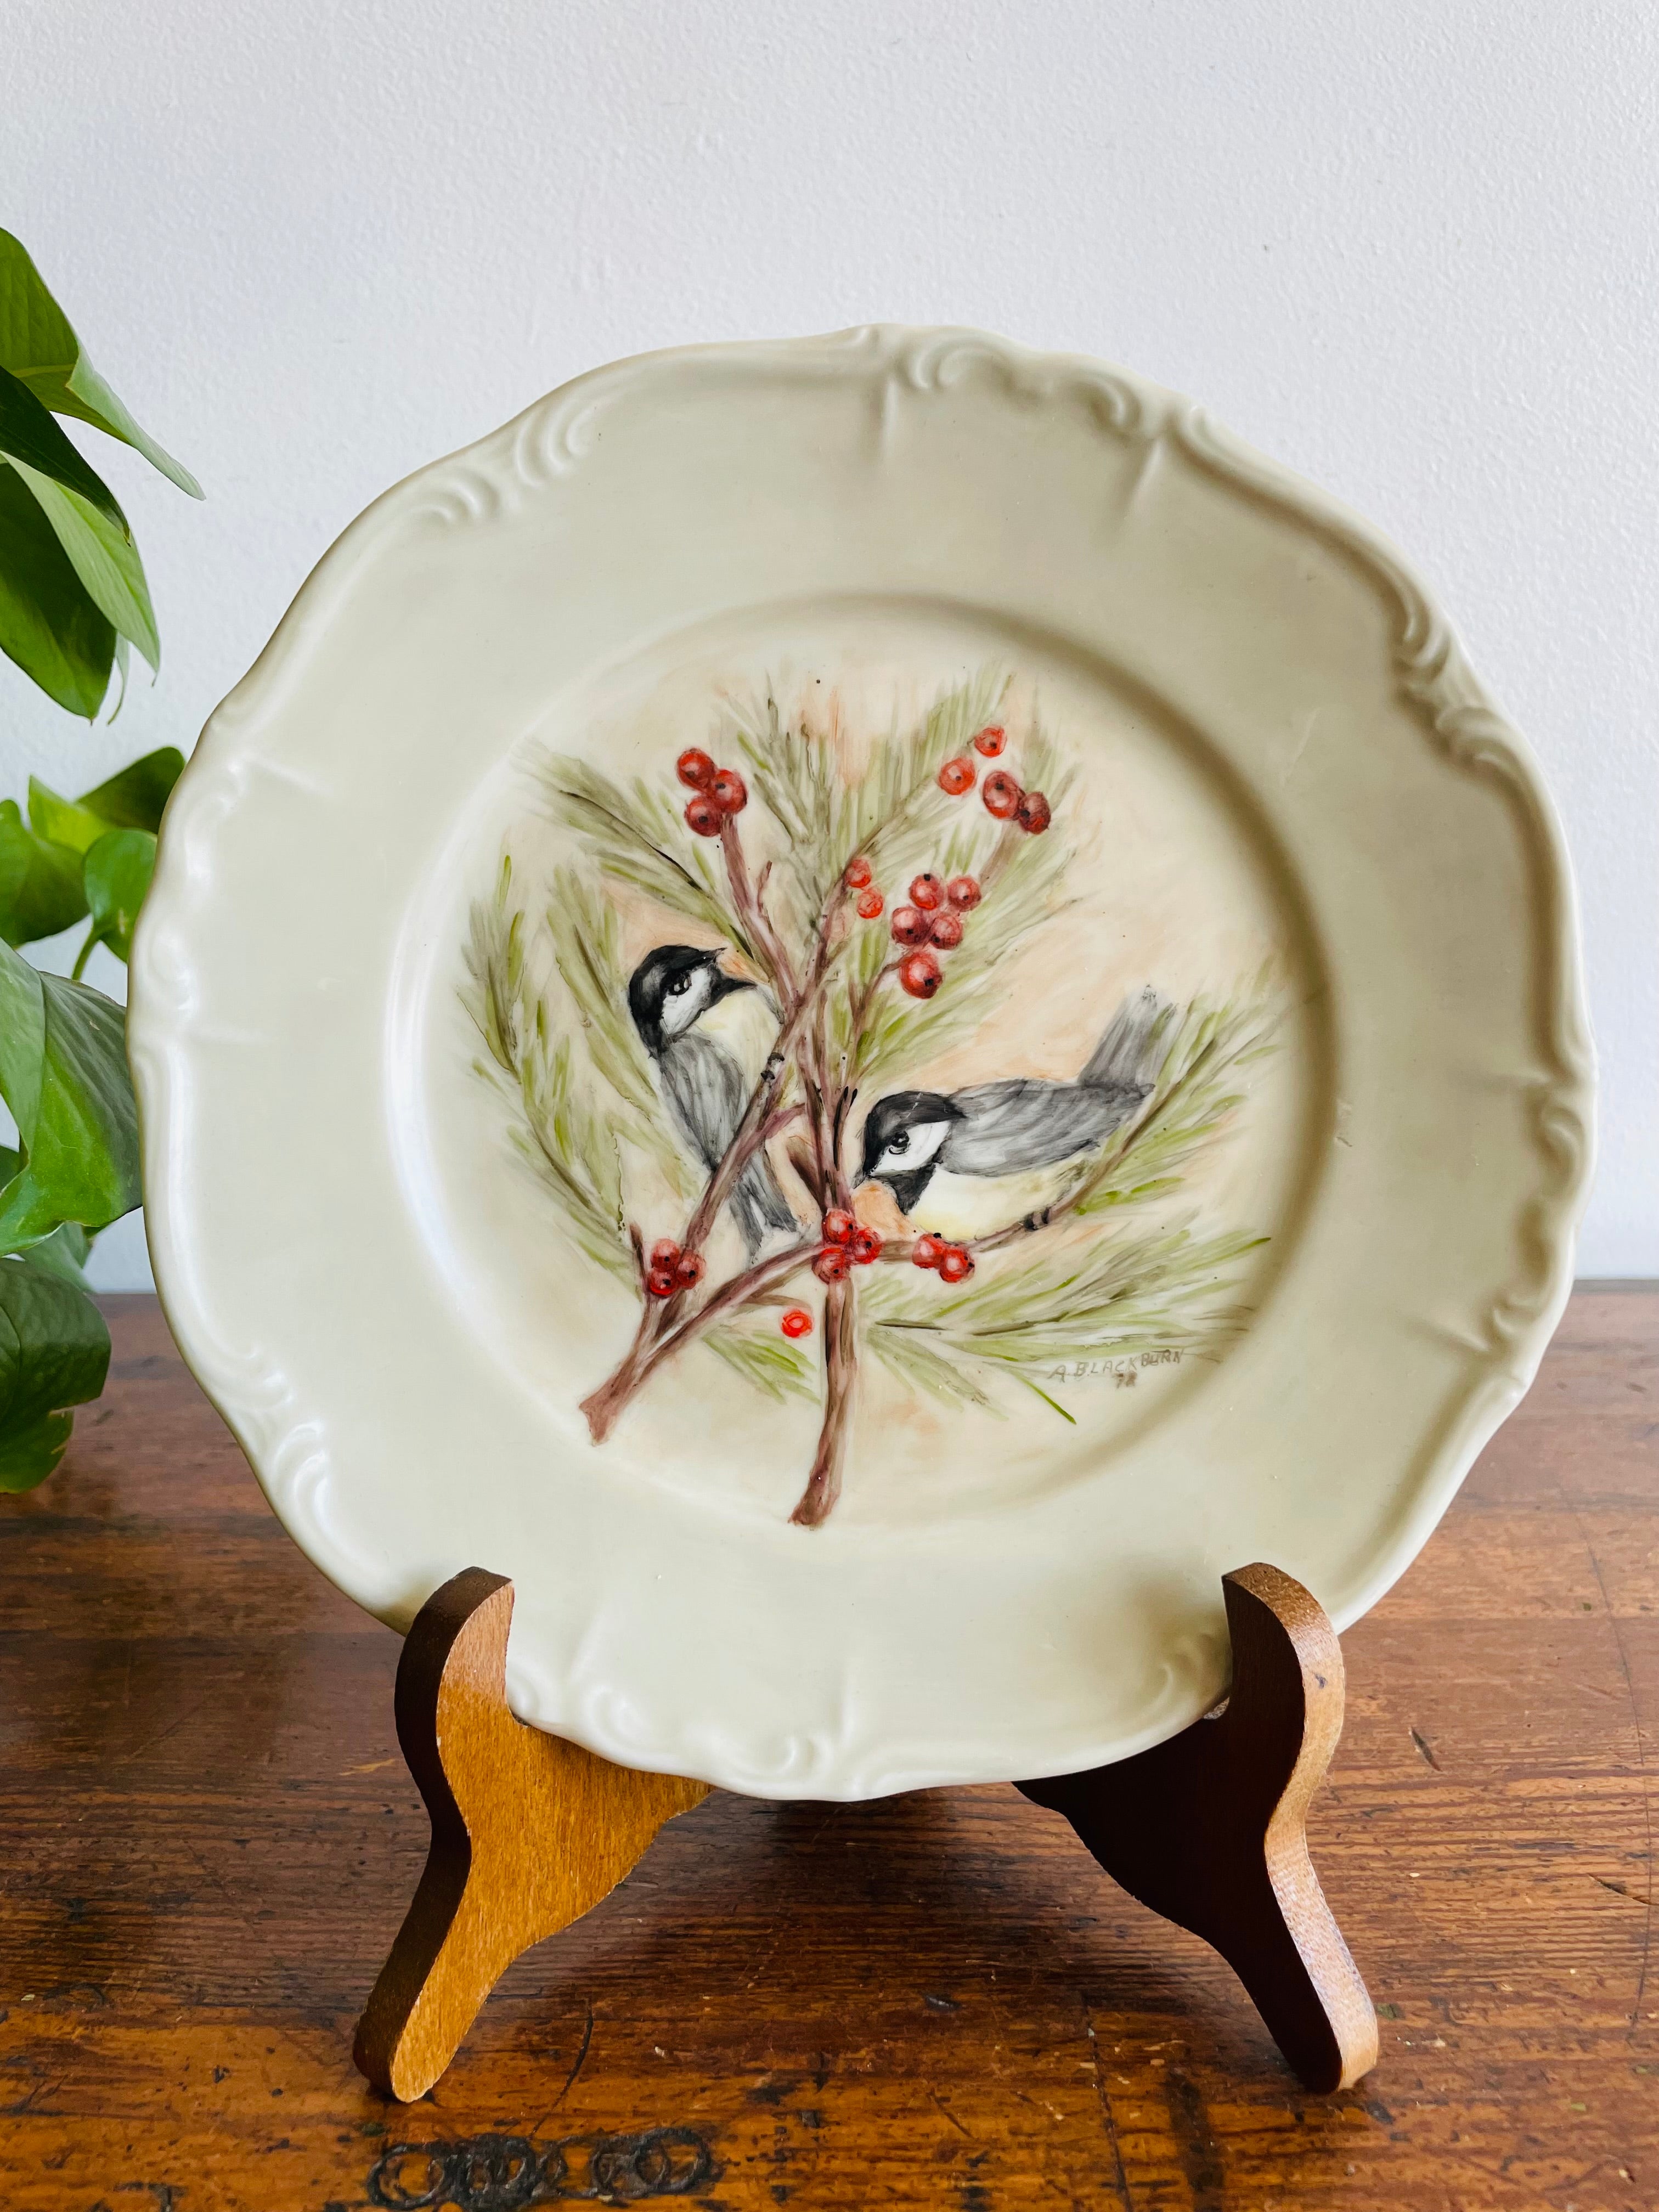 Dishes: Cups, Plates & Bowls – Greenbrier Vintage